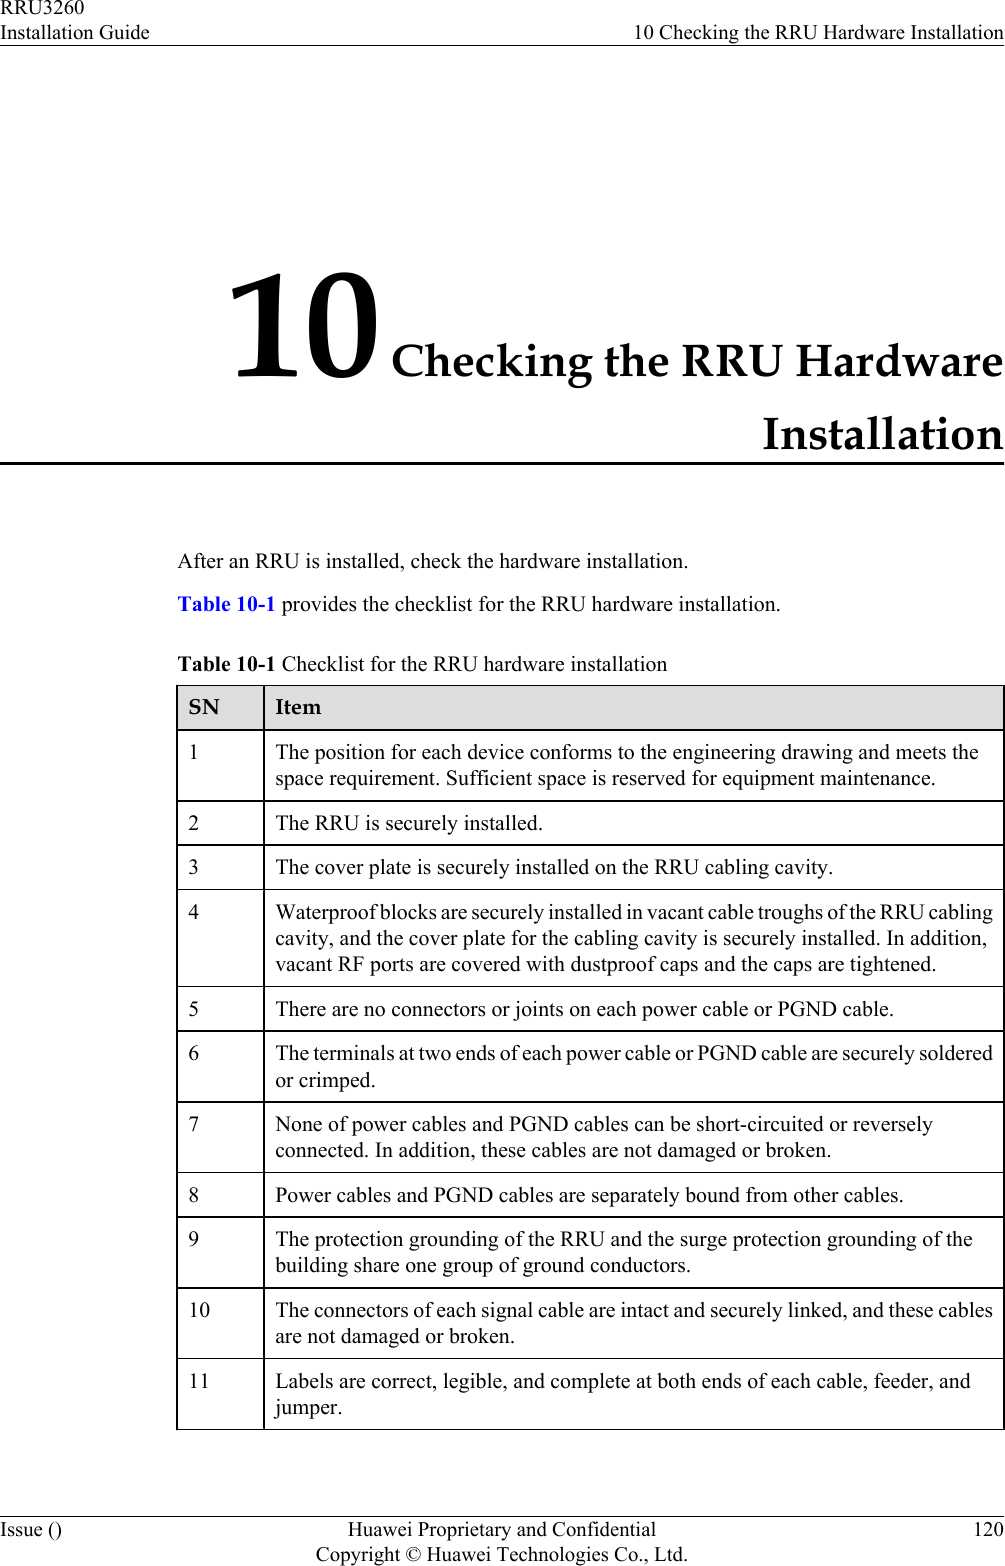 10 Checking the RRU HardwareInstallationAfter an RRU is installed, check the hardware installation.Table 10-1 provides the checklist for the RRU hardware installation.Table 10-1 Checklist for the RRU hardware installationSN Item1The position for each device conforms to the engineering drawing and meets thespace requirement. Sufficient space is reserved for equipment maintenance.2 The RRU is securely installed.3 The cover plate is securely installed on the RRU cabling cavity.4 Waterproof blocks are securely installed in vacant cable troughs of the RRU cablingcavity, and the cover plate for the cabling cavity is securely installed. In addition,vacant RF ports are covered with dustproof caps and the caps are tightened.5 There are no connectors or joints on each power cable or PGND cable.6 The terminals at two ends of each power cable or PGND cable are securely solderedor crimped.7 None of power cables and PGND cables can be short-circuited or reverselyconnected. In addition, these cables are not damaged or broken.8 Power cables and PGND cables are separately bound from other cables.9 The protection grounding of the RRU and the surge protection grounding of thebuilding share one group of ground conductors.10 The connectors of each signal cable are intact and securely linked, and these cablesare not damaged or broken.11 Labels are correct, legible, and complete at both ends of each cable, feeder, andjumper.RRU3260Installation Guide 10 Checking the RRU Hardware InstallationIssue () Huawei Proprietary and ConfidentialCopyright © Huawei Technologies Co., Ltd.120